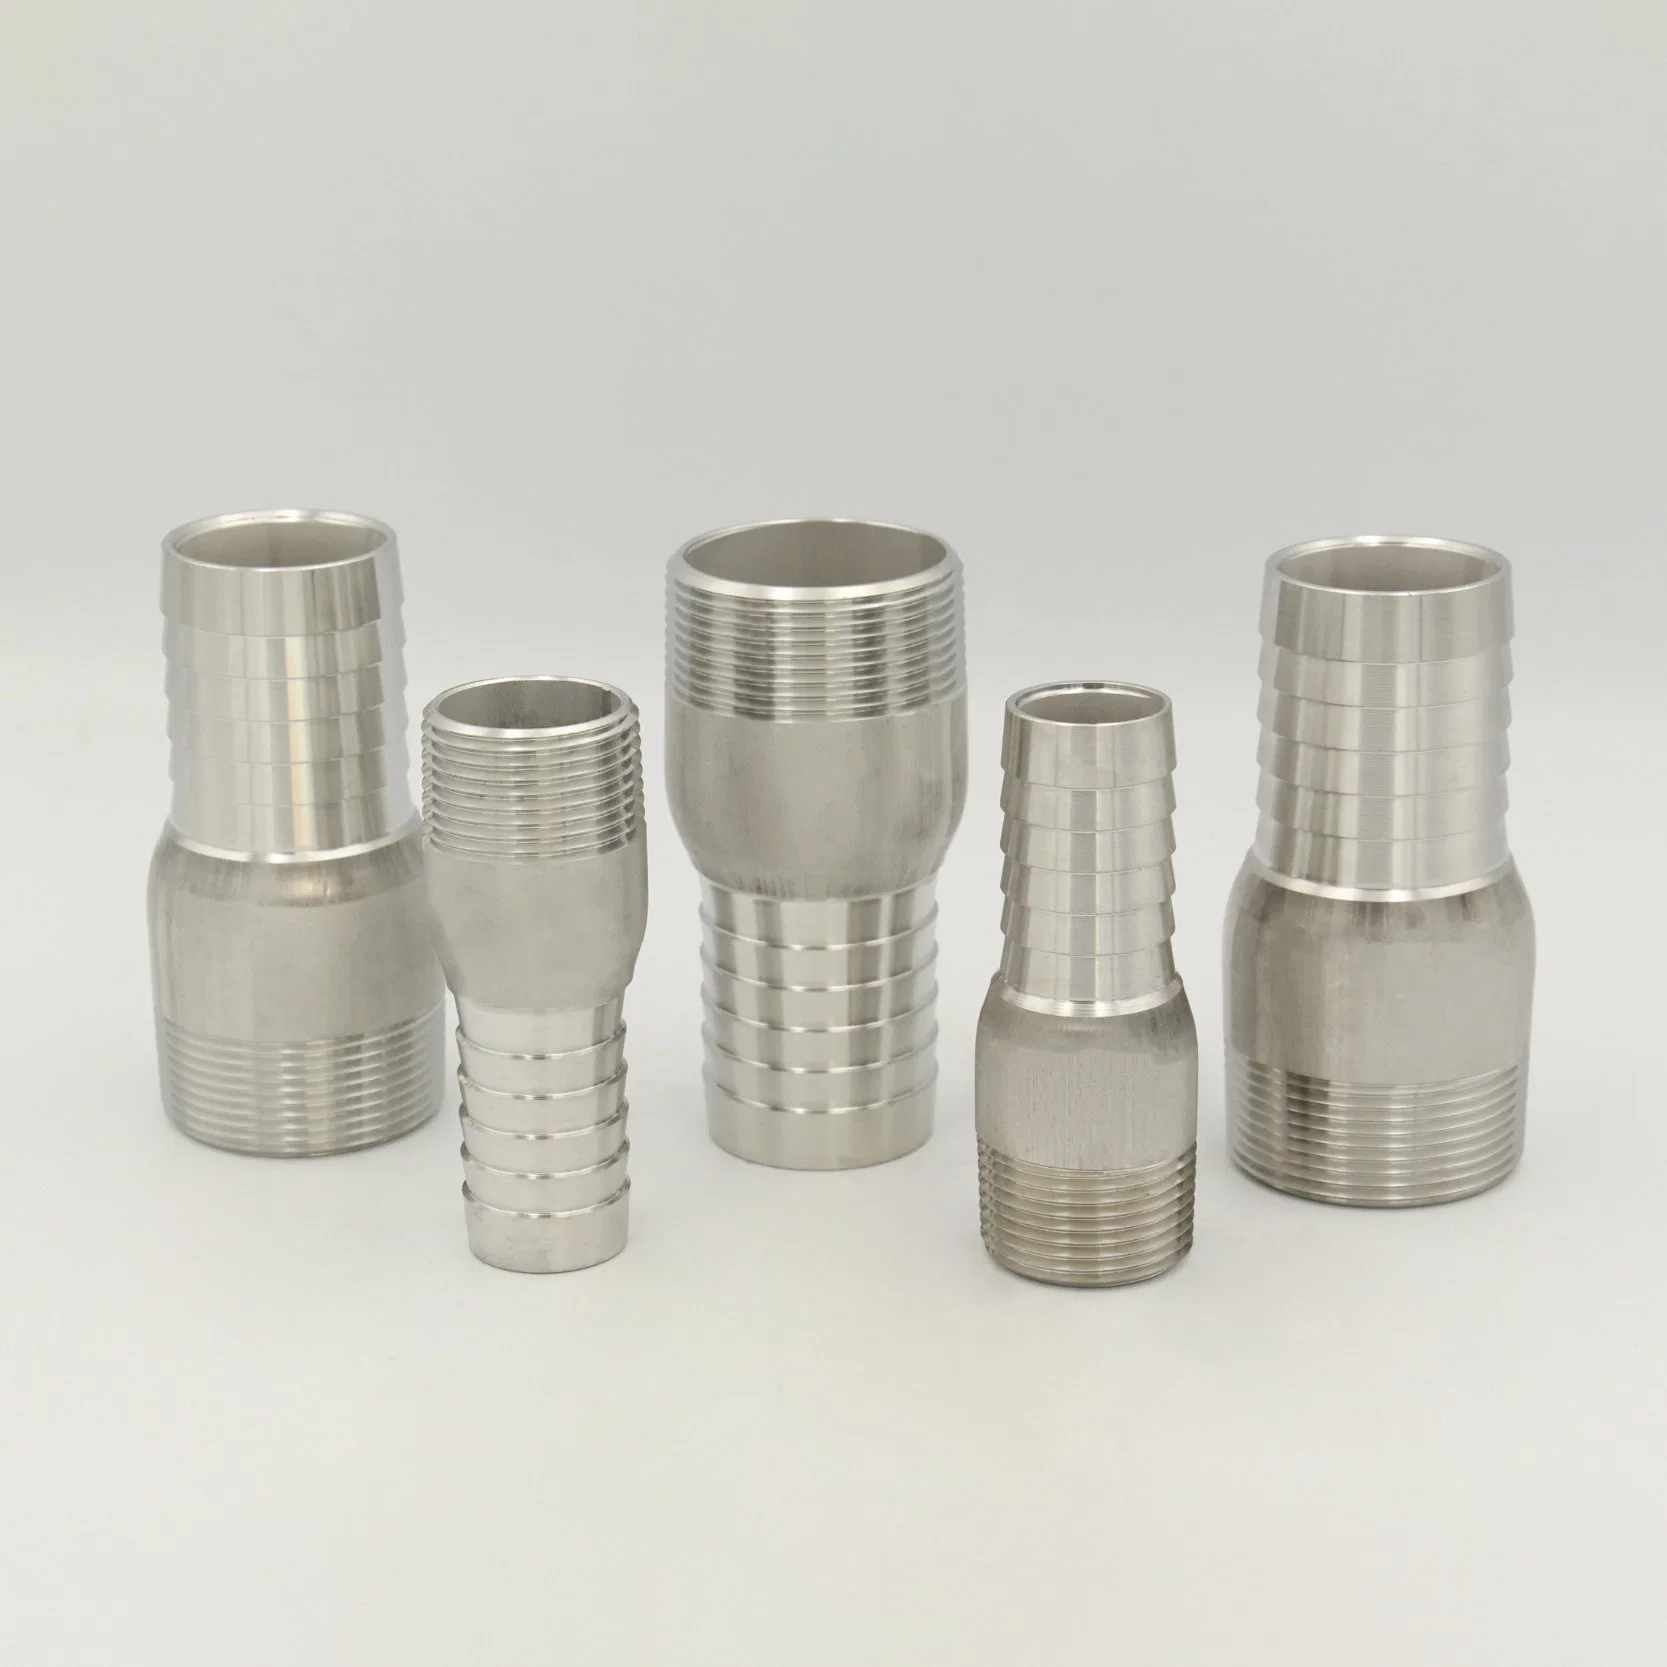 Stainless Steel High Quality Hose Fitting King Nipple